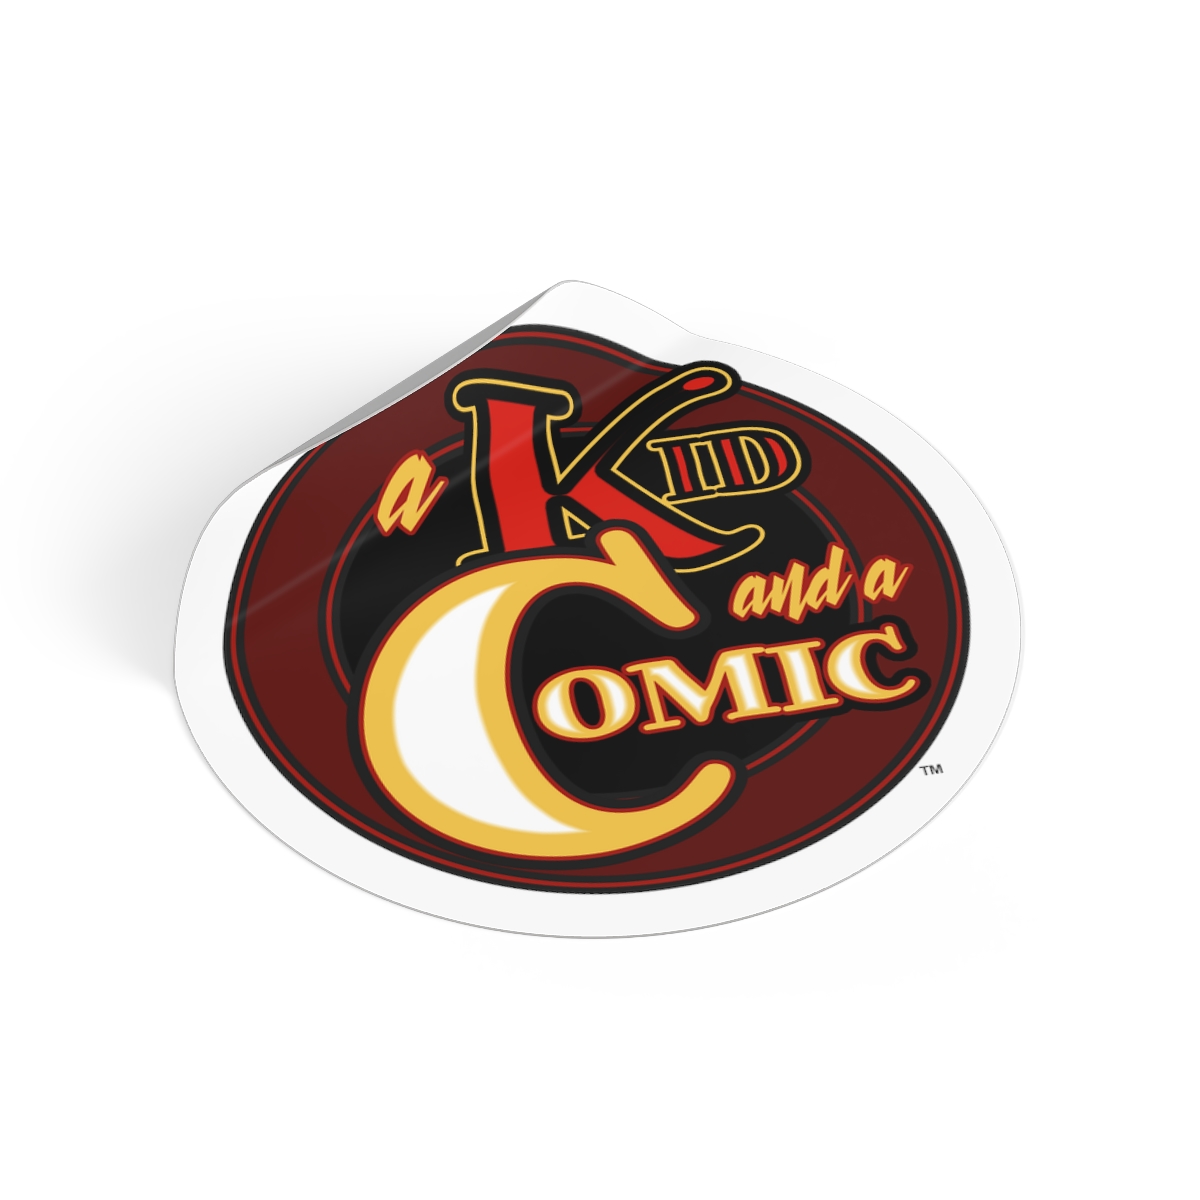 AKAAC - Round Vinyl Stickers product thumbnail image